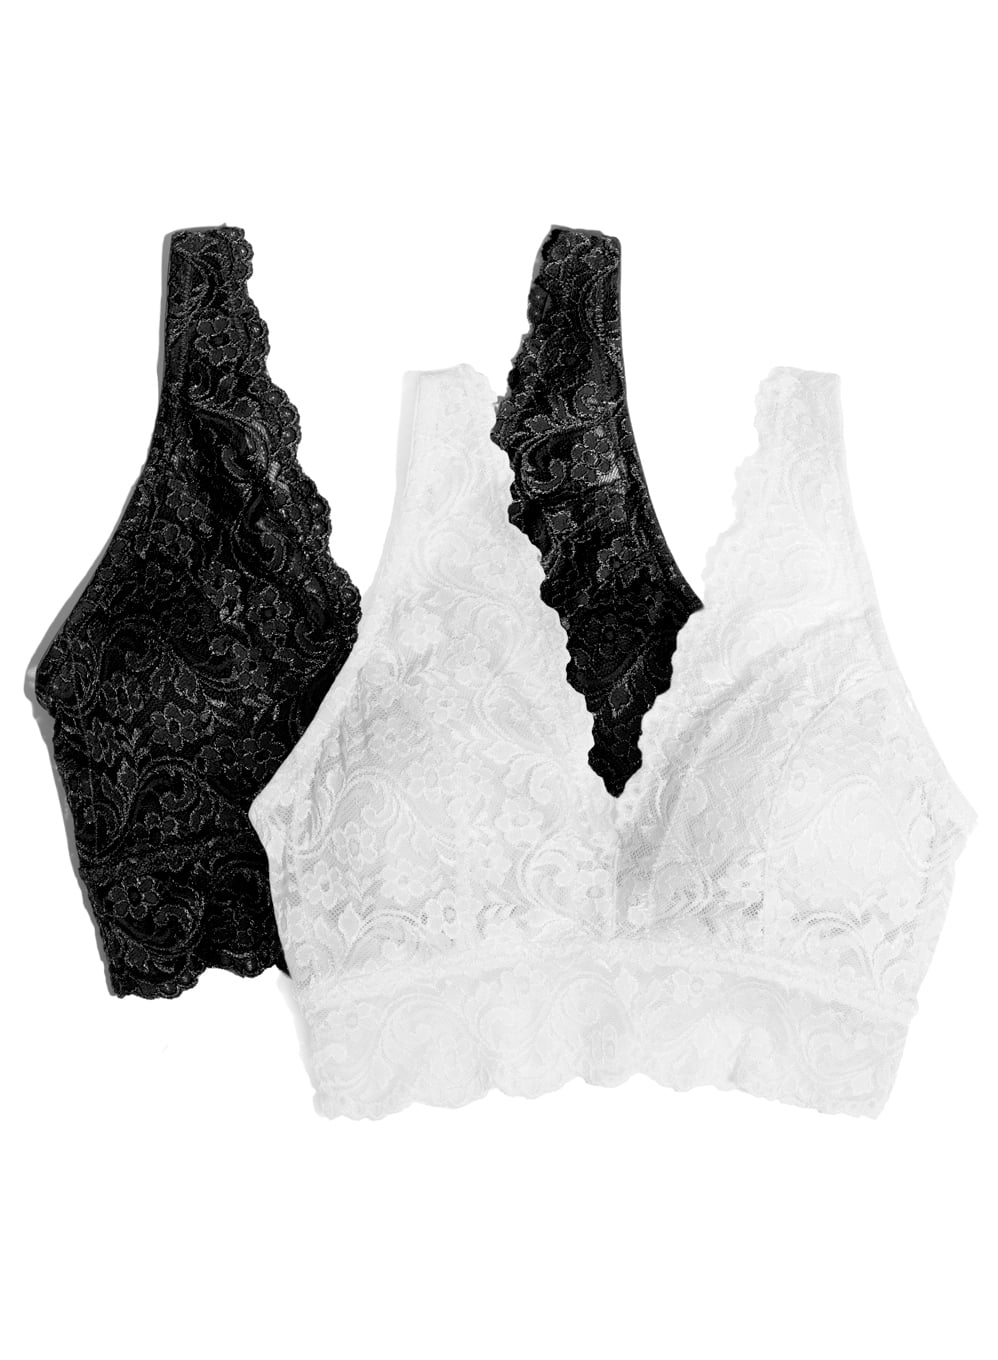 Smart & Sexy Women's Signature Lace Deep V Bralette, 2-Pack